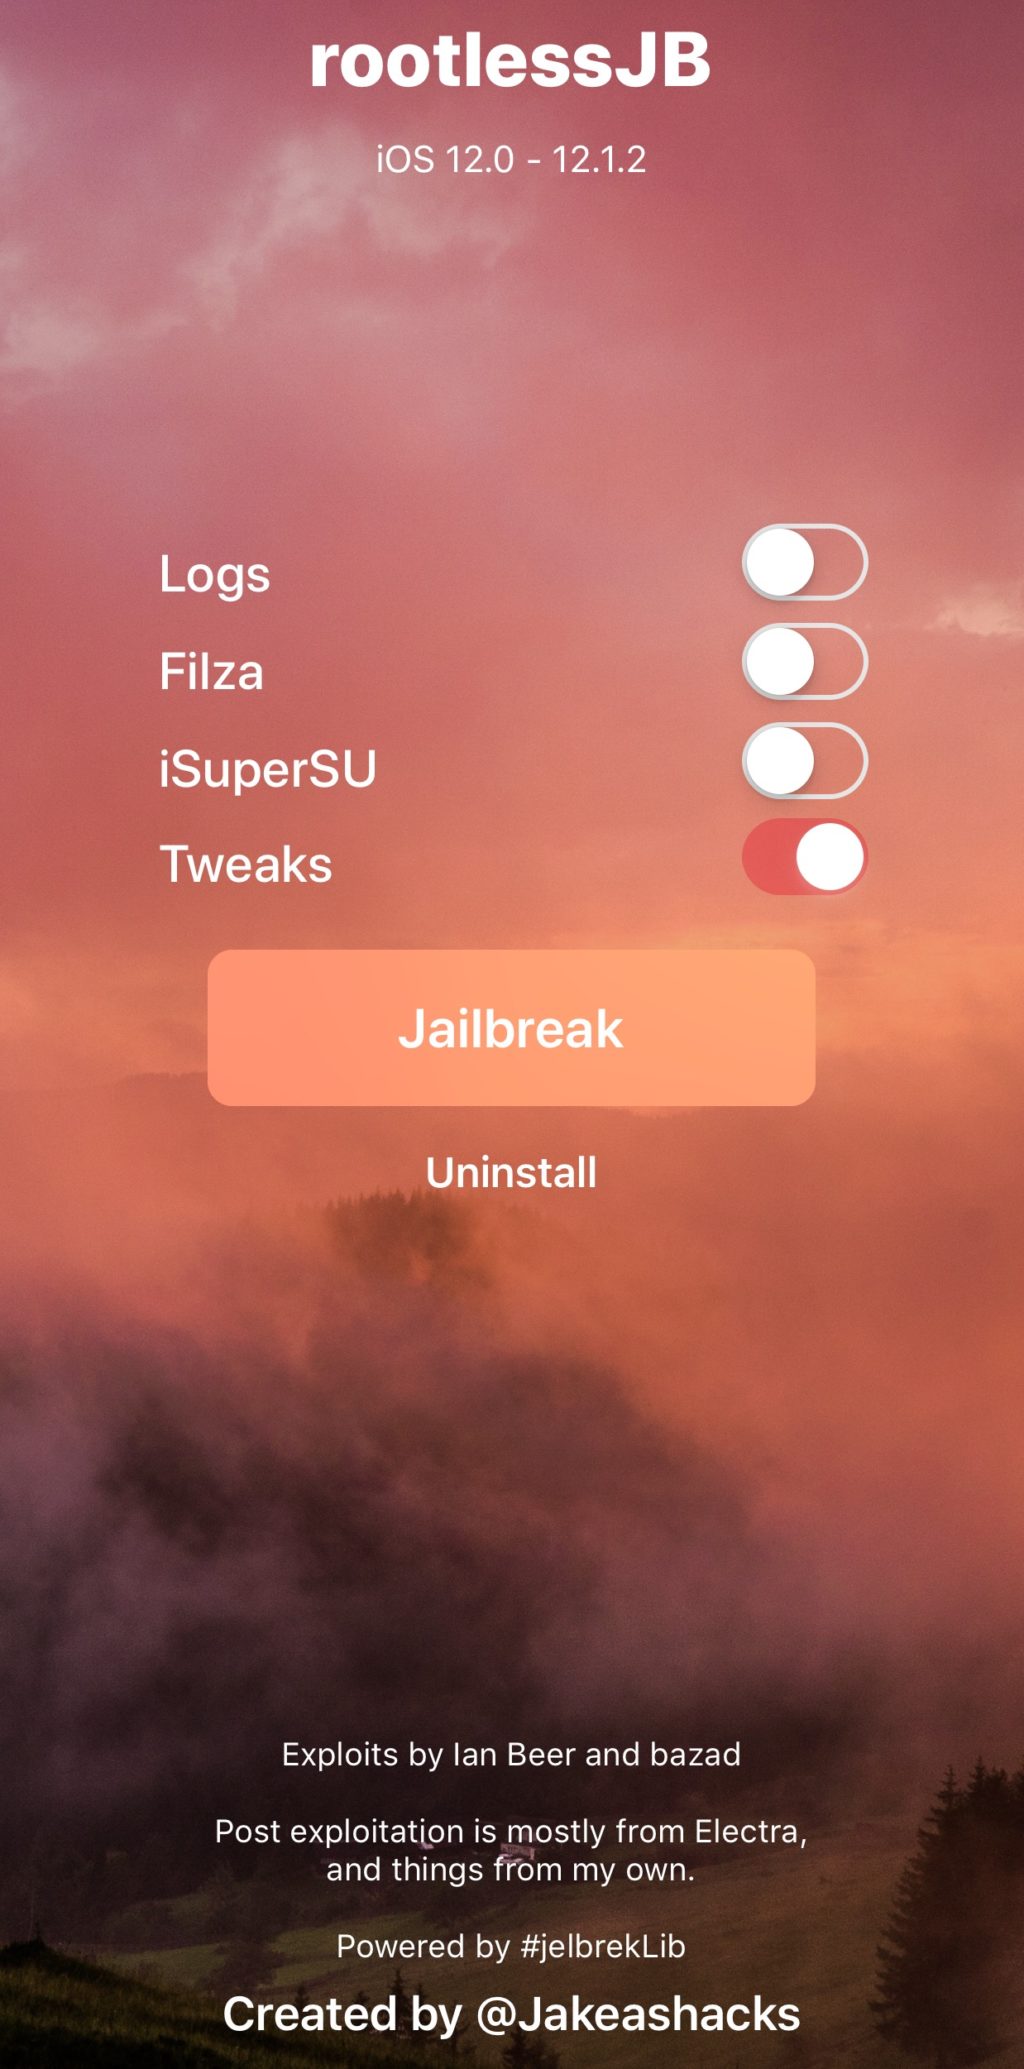 Rootless Vs Full Root Jailbreak: What’s the Difference?